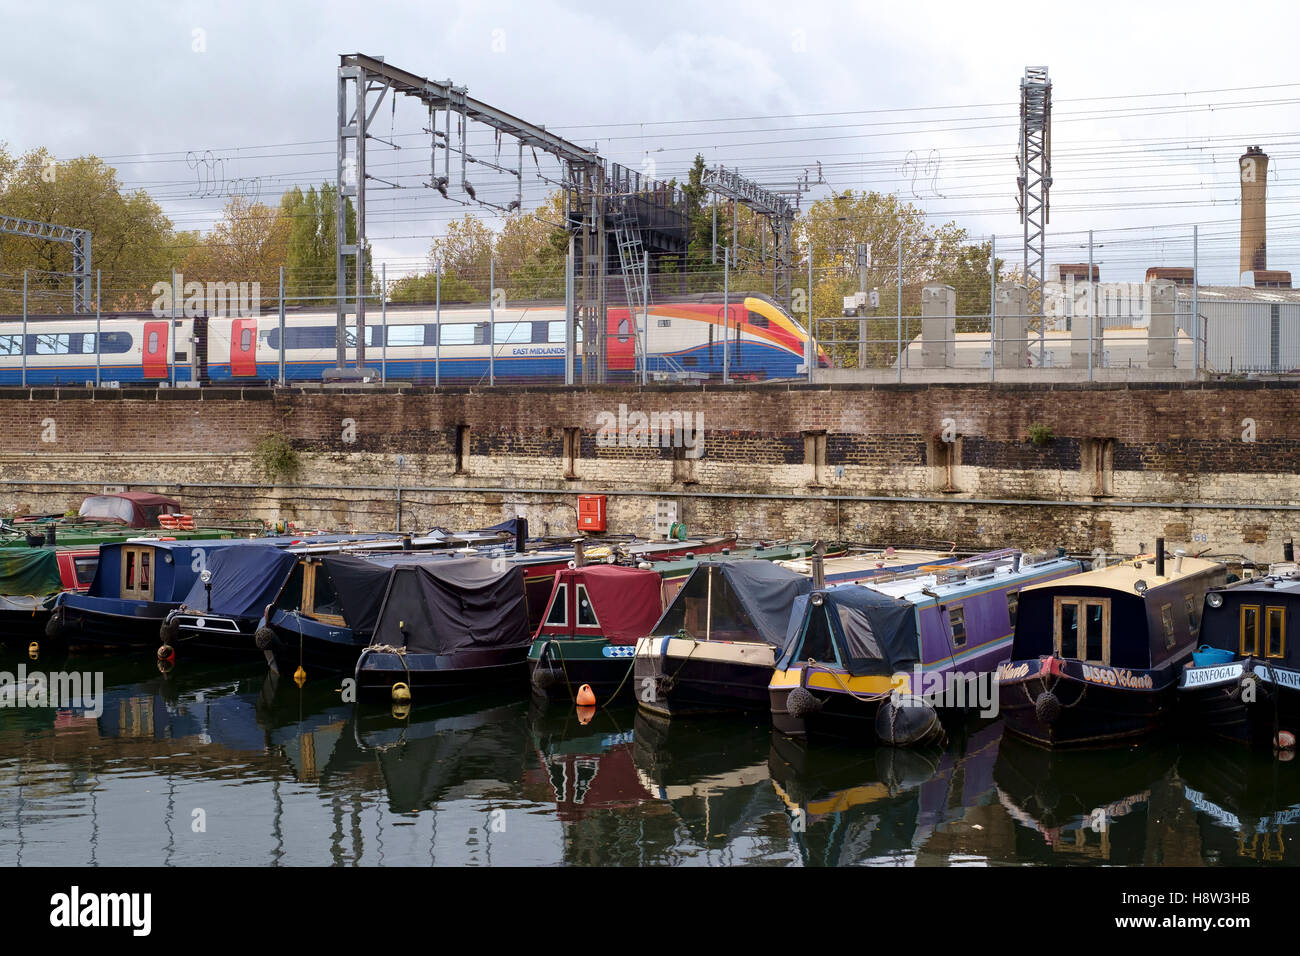 The Regents Canal at St Pancras in London.  A locomotive from East Midlands Trains besides a canal basin of moored narrowboats. Stock Photo